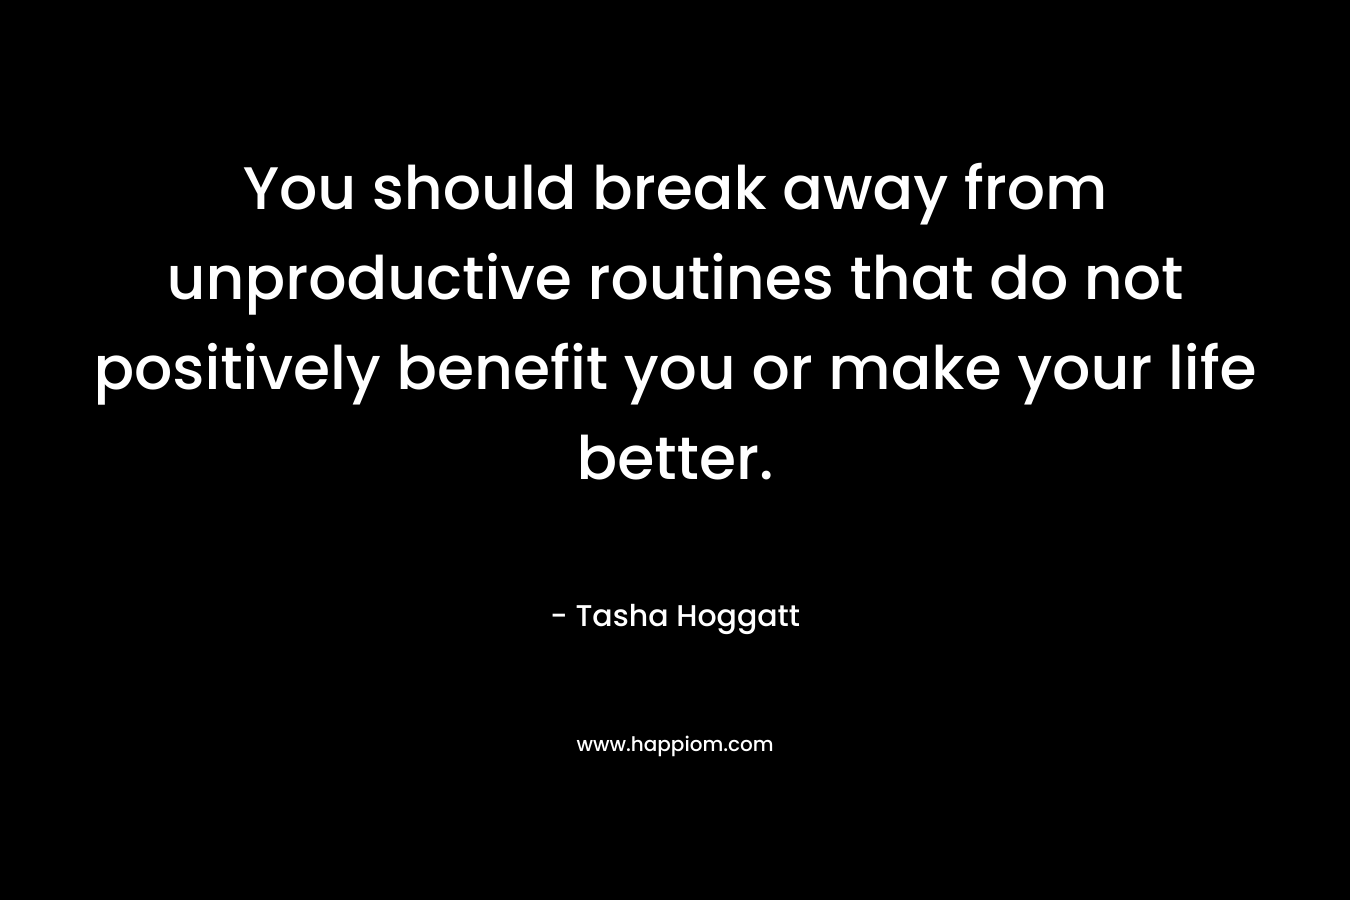 You should break away from unproductive routines that do not positively benefit you or make your life better. – Tasha Hoggatt